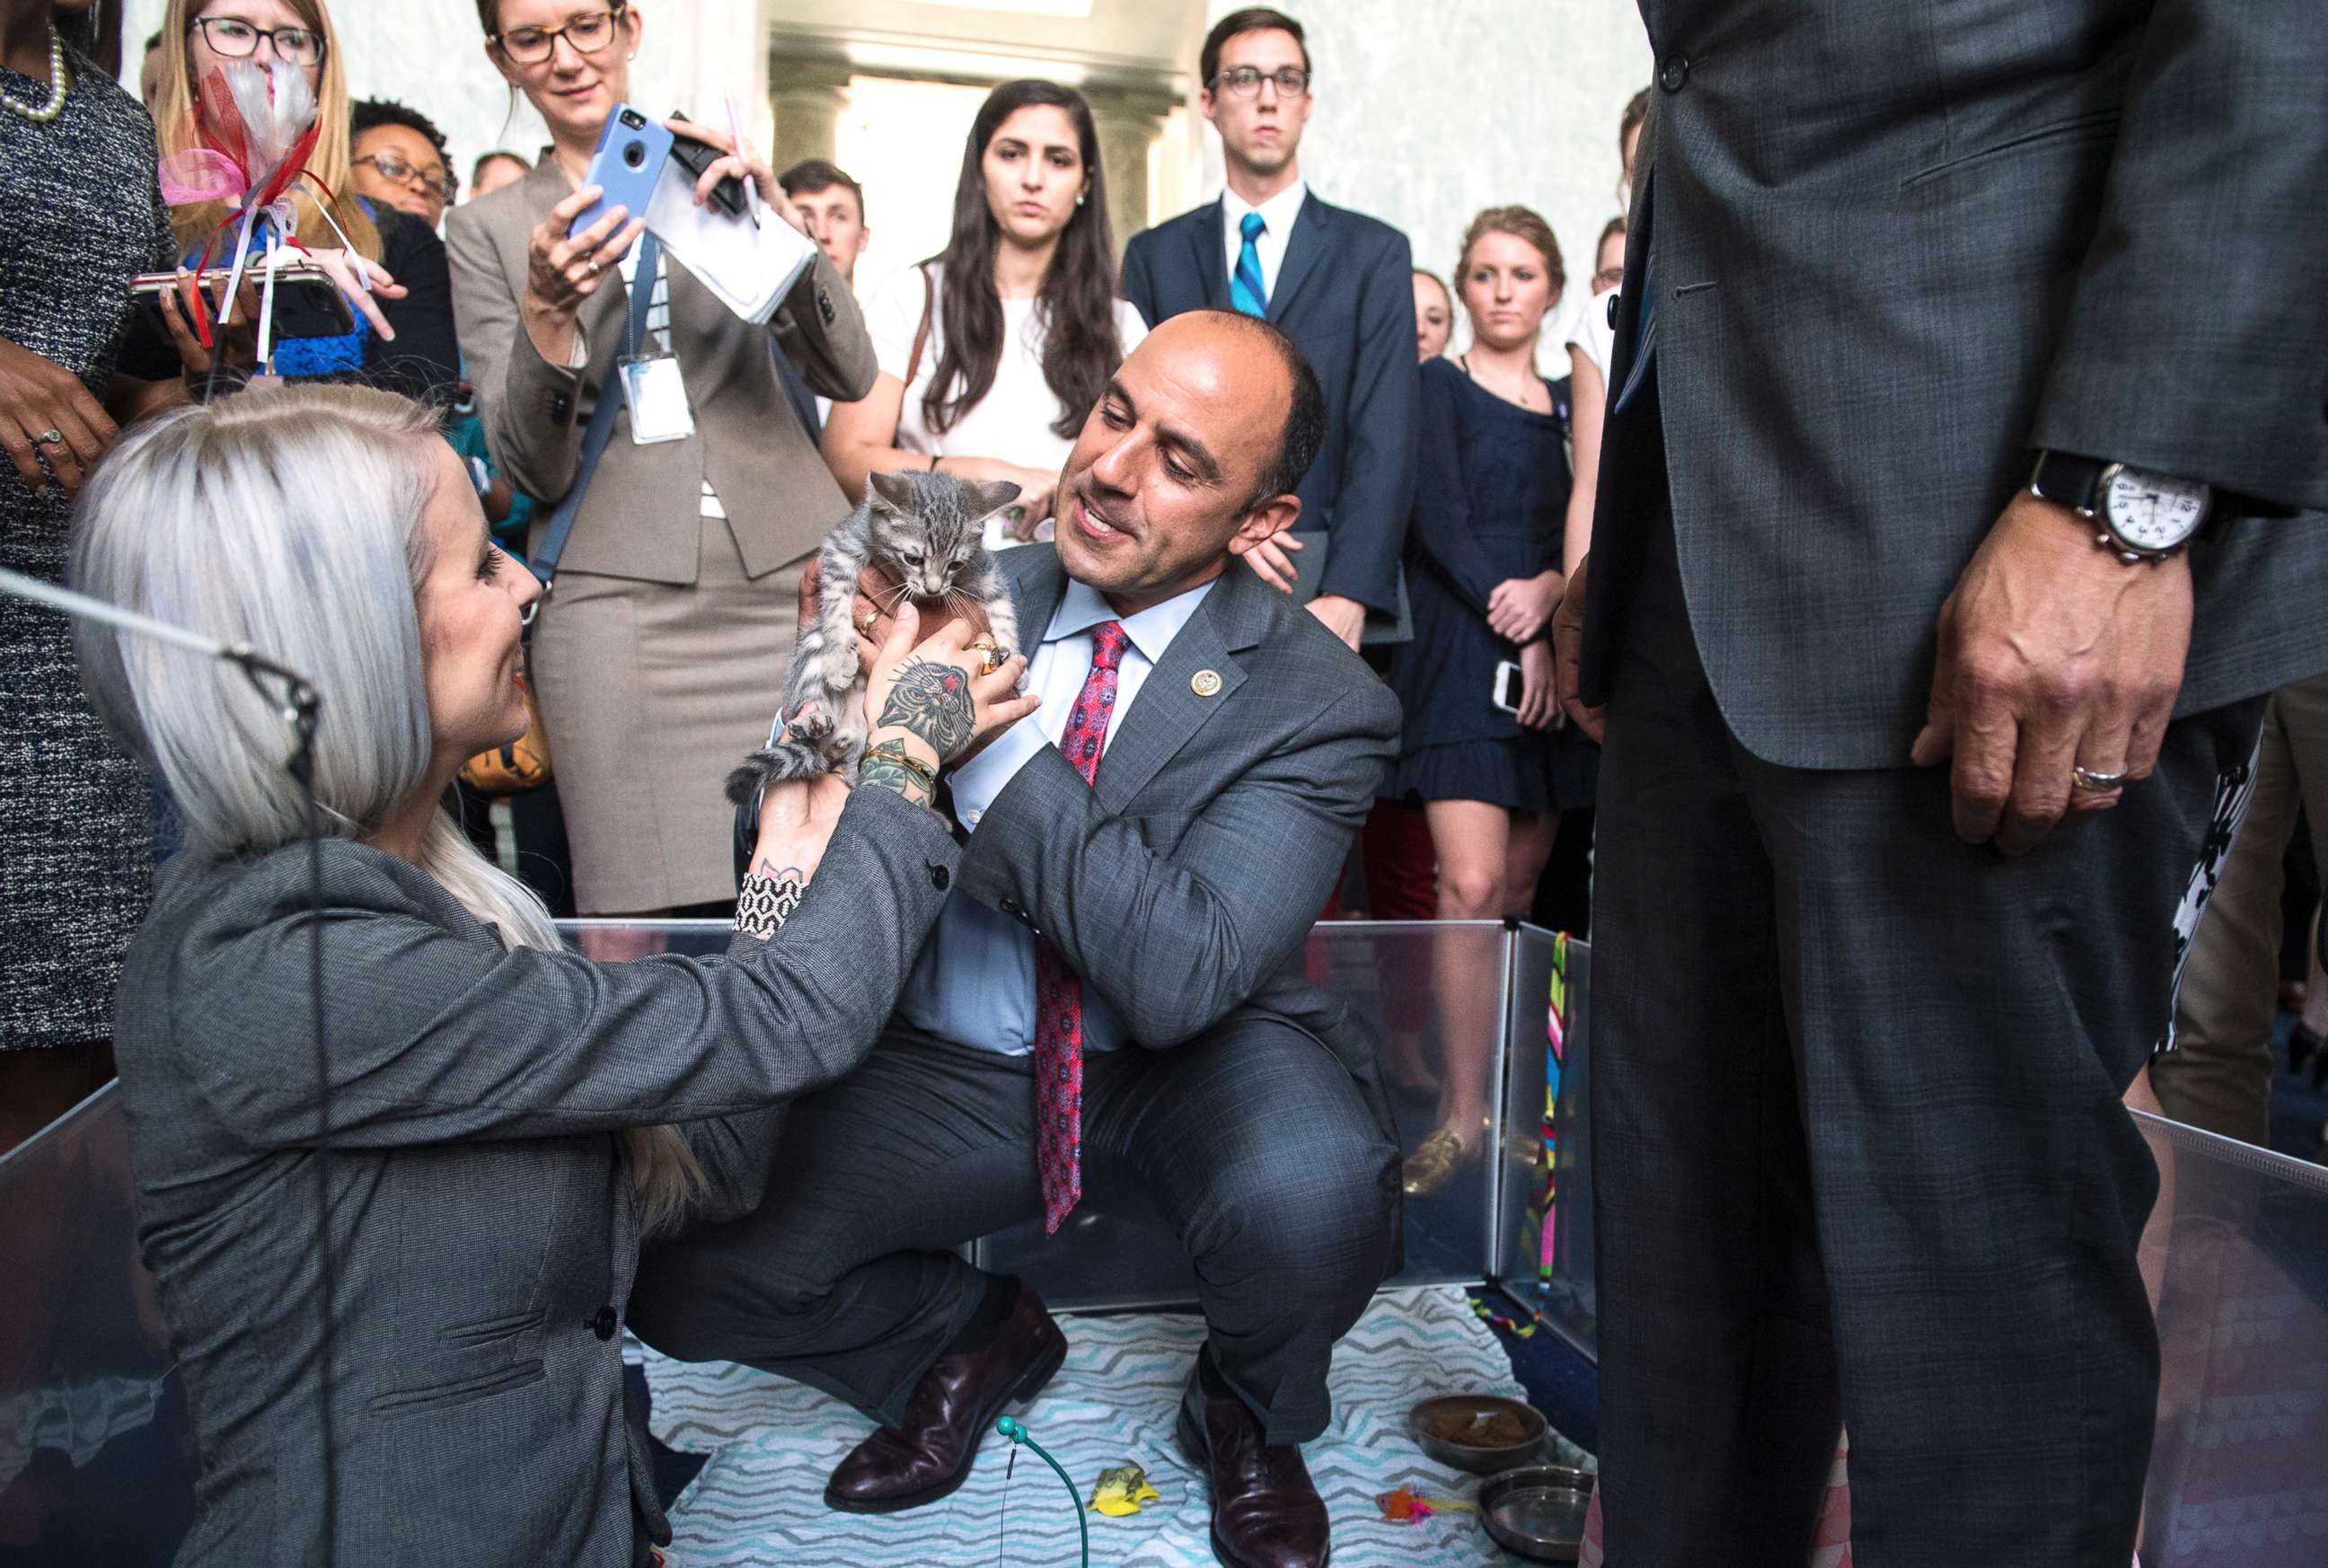 PHOTO: Rep. Jimmy Panetta, center, Hannah Shaw, an animal advocate know as "Kitten Lady," play with kittens during a event on bipartisan legislation to end the Department of Agriculture's scientific testing on kittens, June 7, 2018.